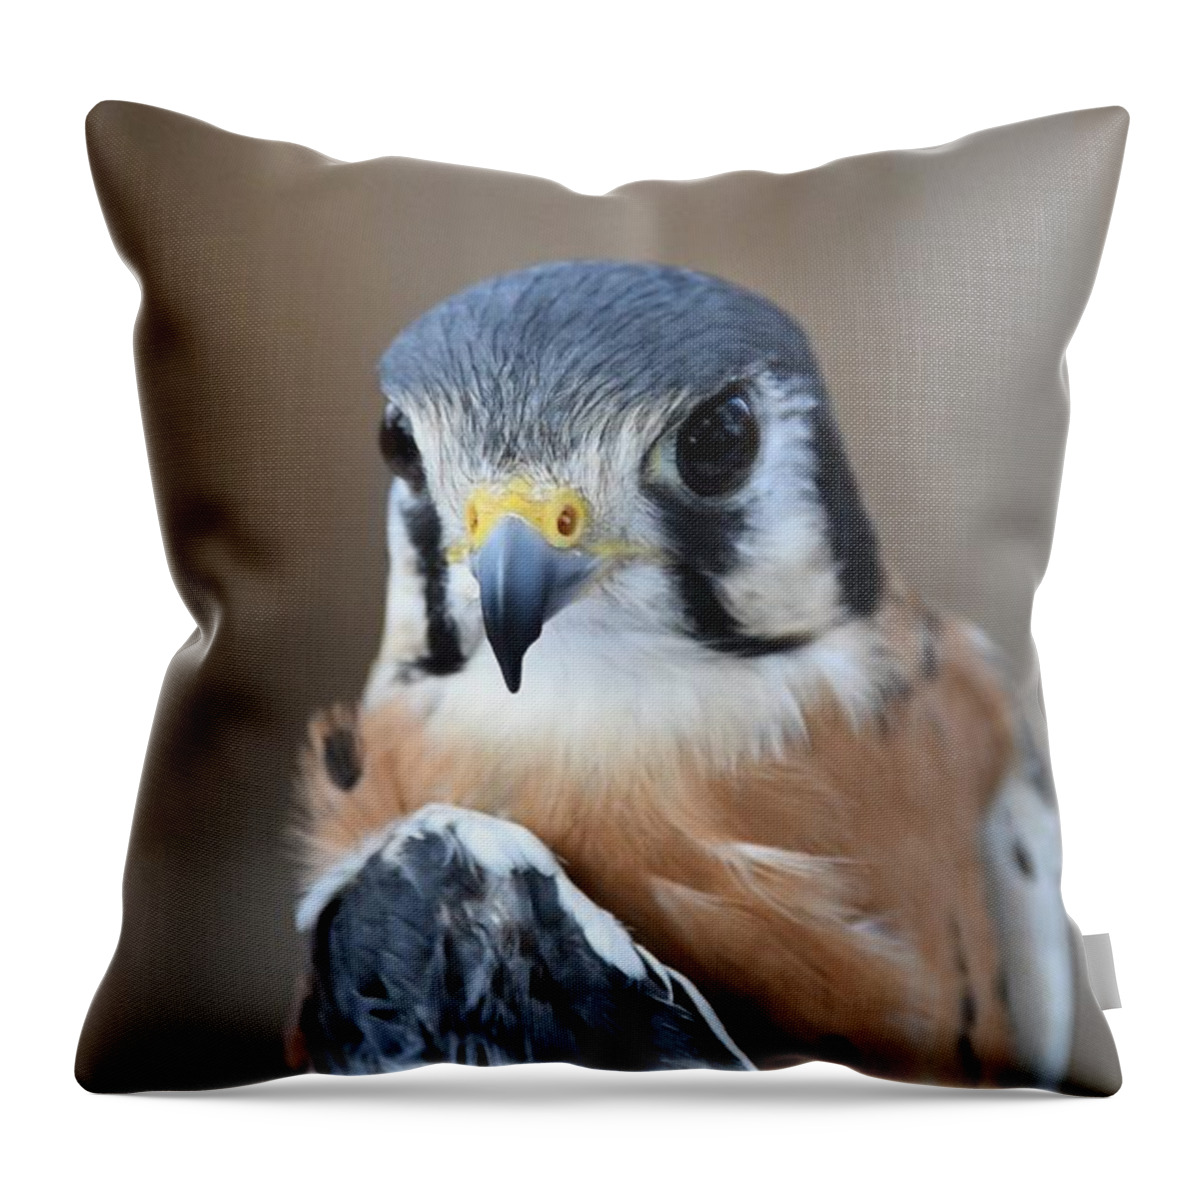 Falcon Throw Pillow featuring the photograph American Kestrel by David Campione